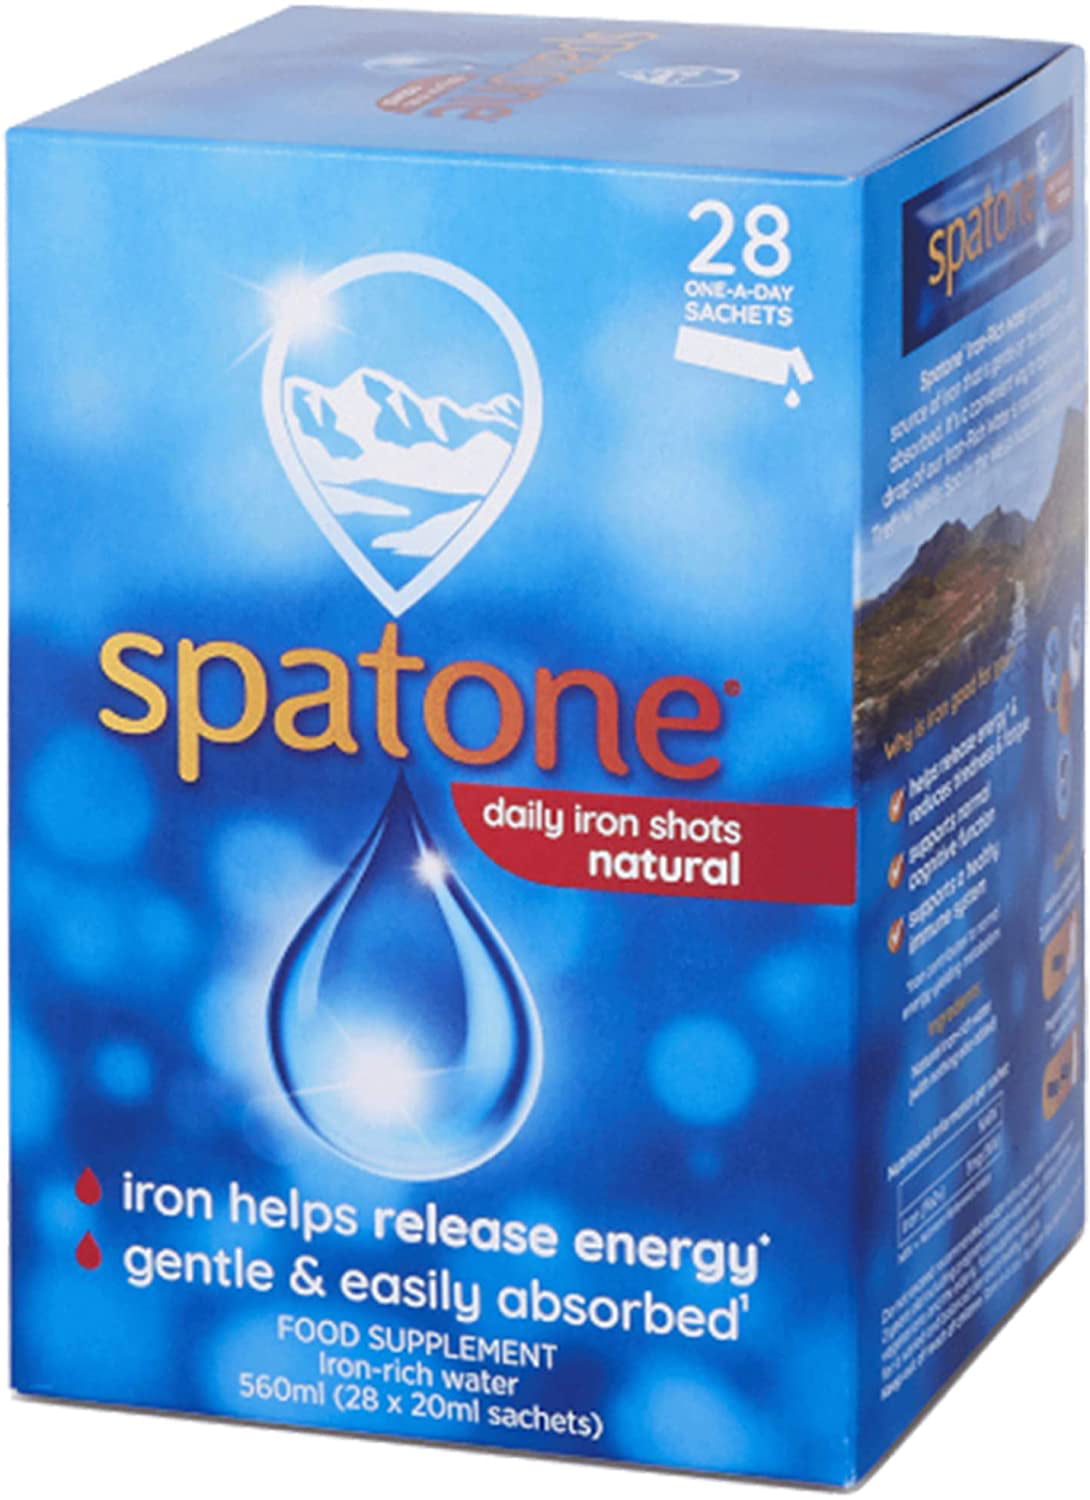 Spatone 100% Natural Iron 28 sachet, Gentle on the stomach By Brand Spatone - Walmart.com